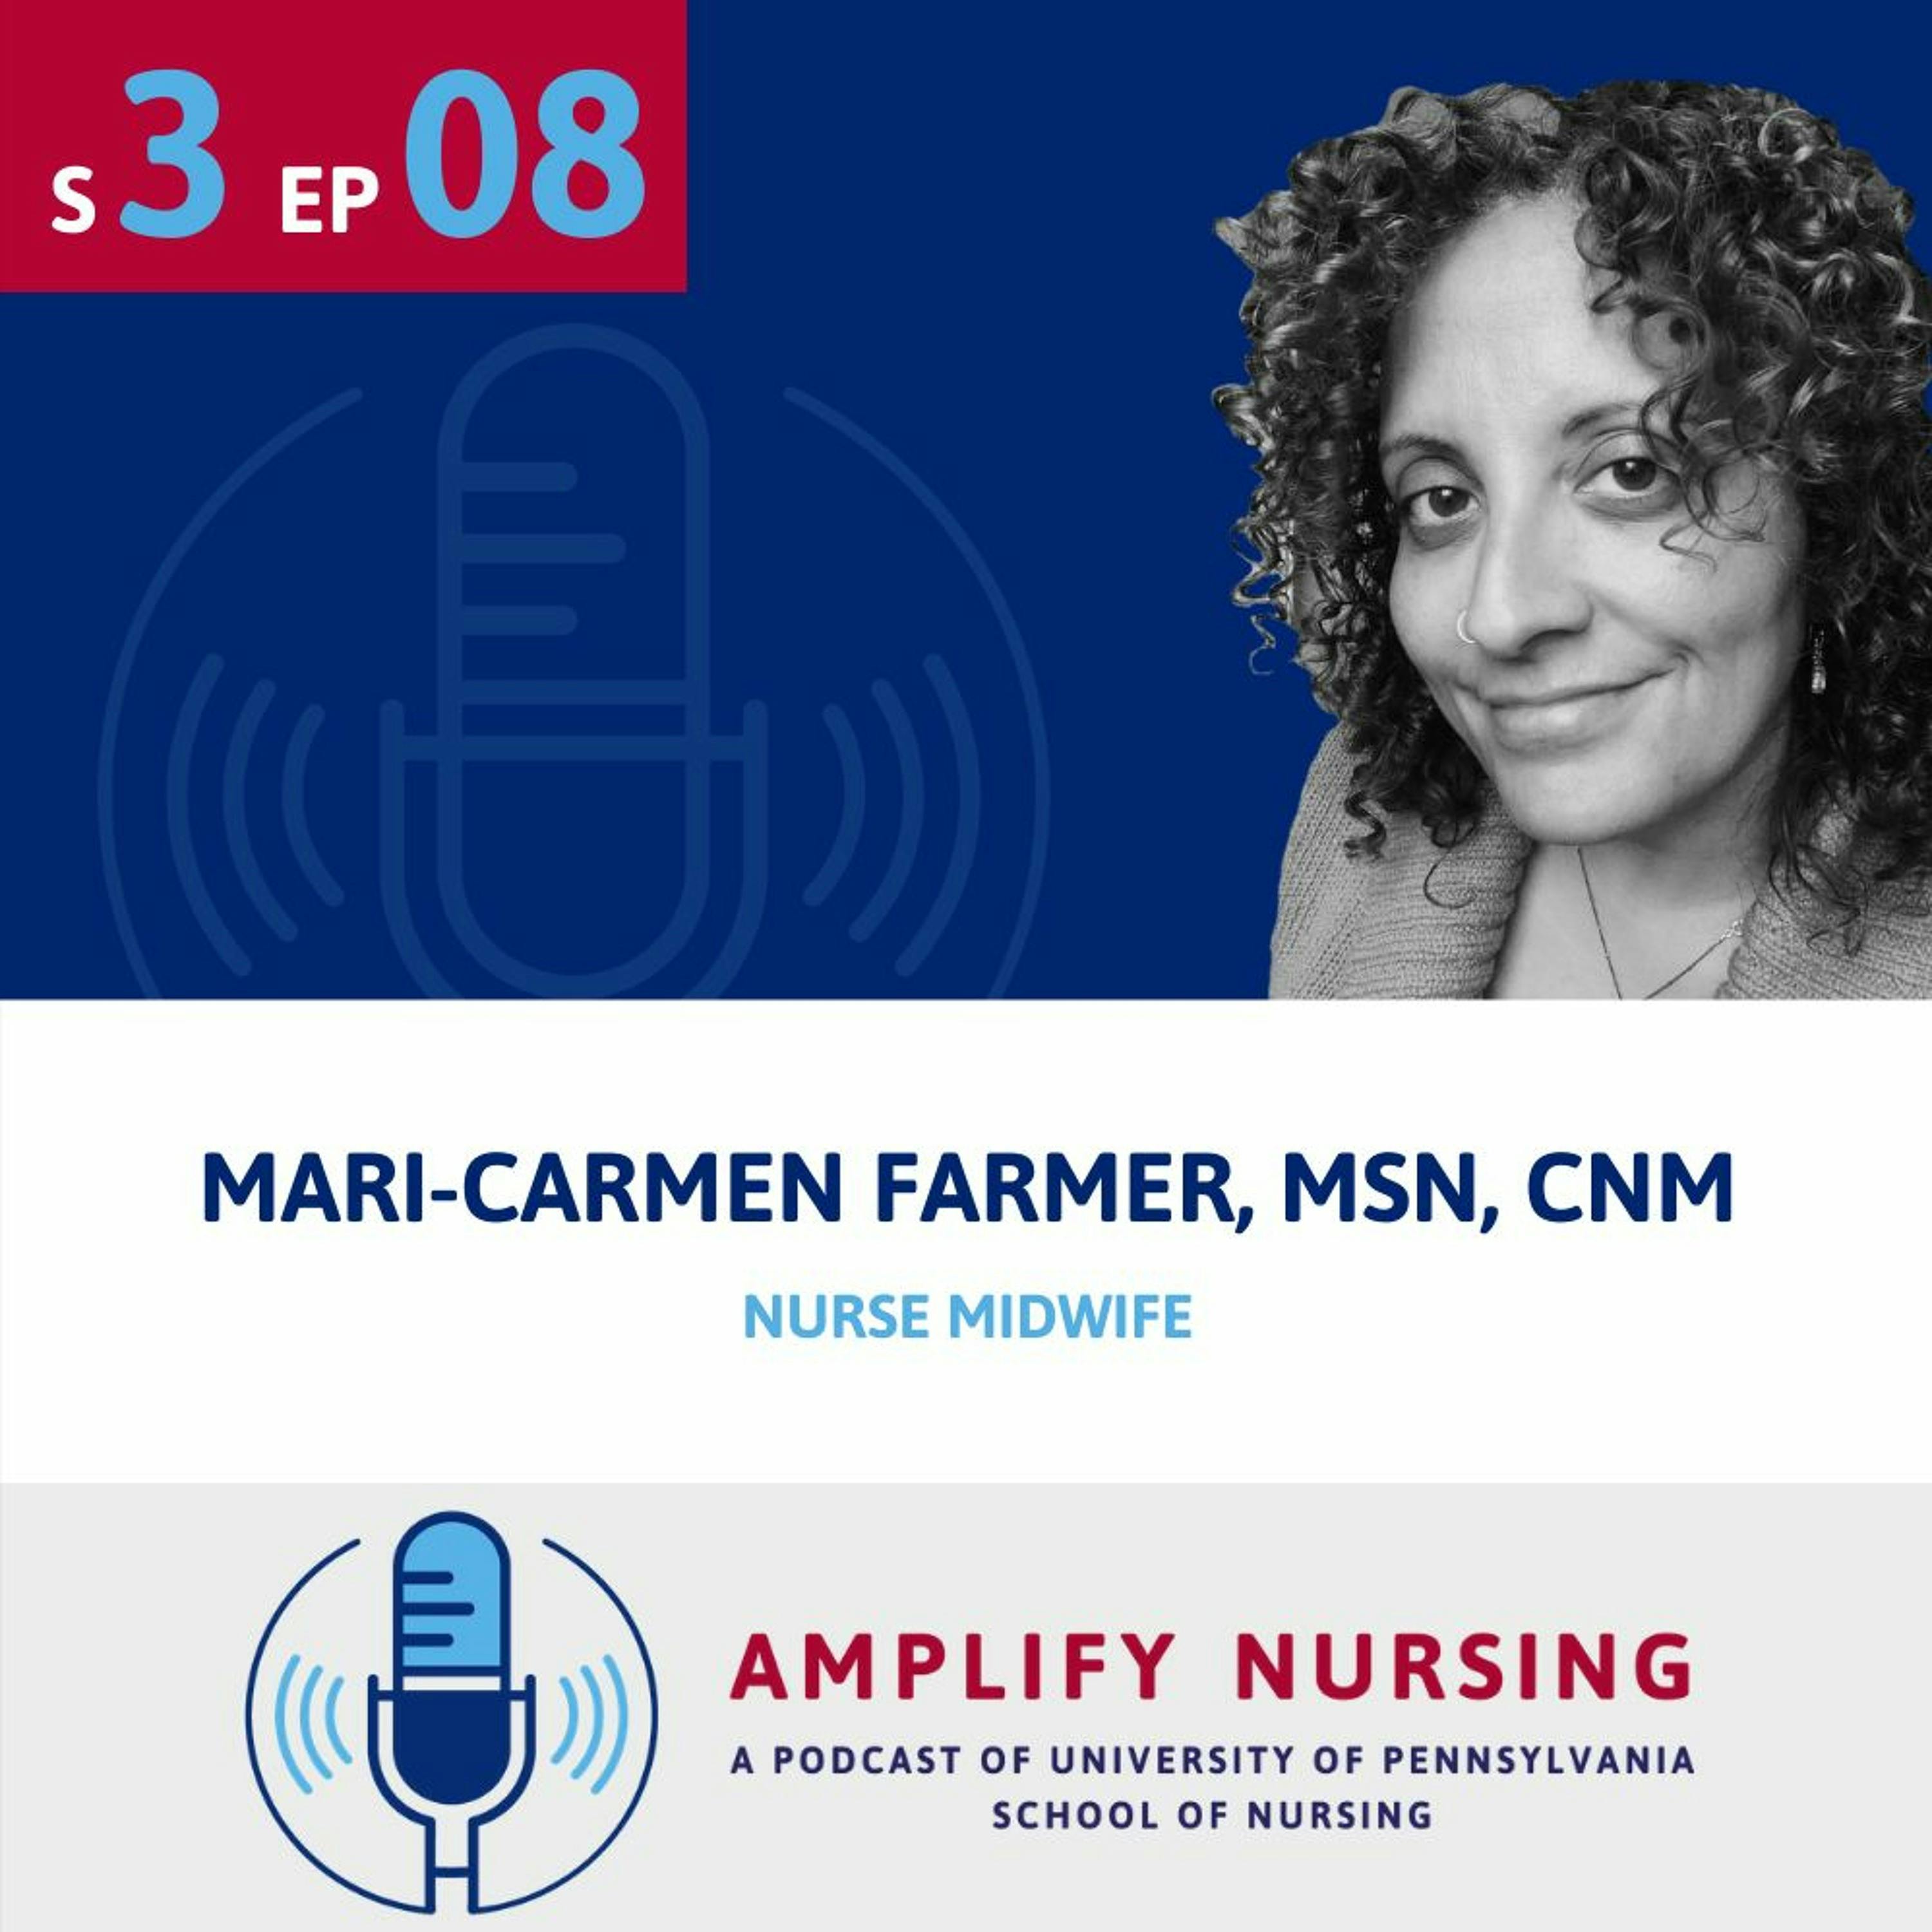 Amplify Nursing: How the pandemic, racial unrest, and health inequity affects the most vulnerable patients with Mari-Carmen Farmer